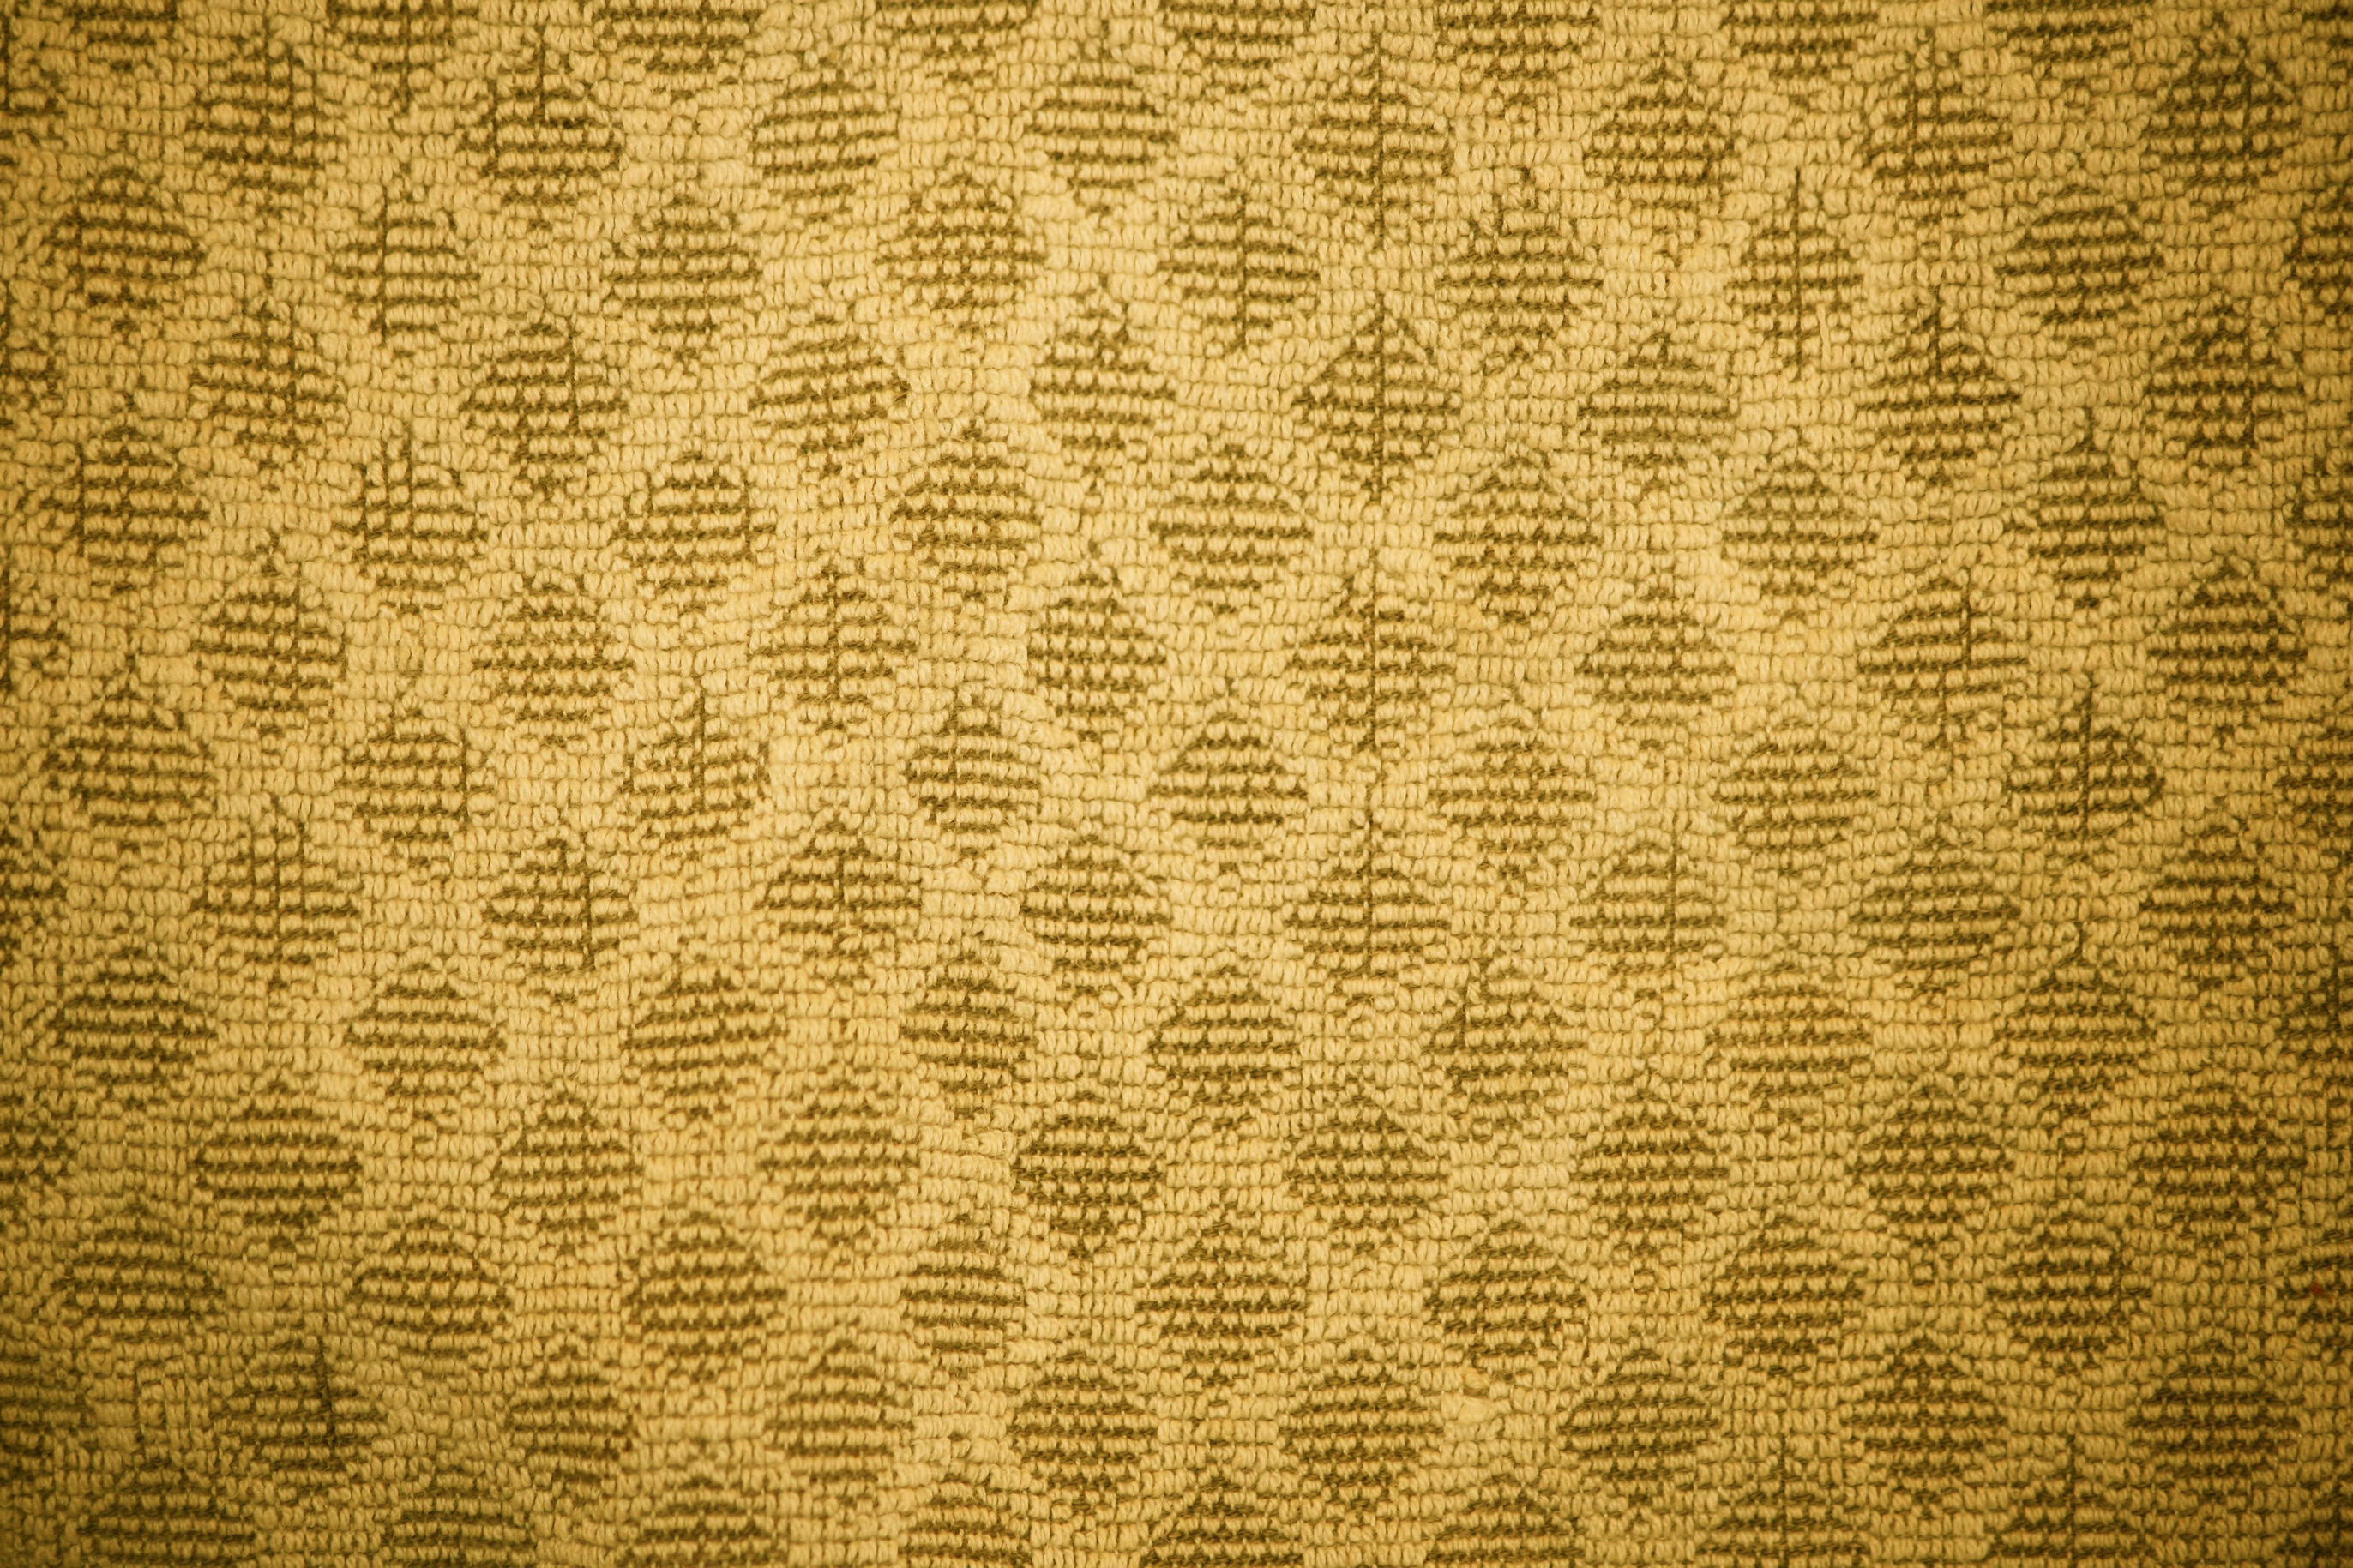  texture gold fabric cloth texture photo gold background download